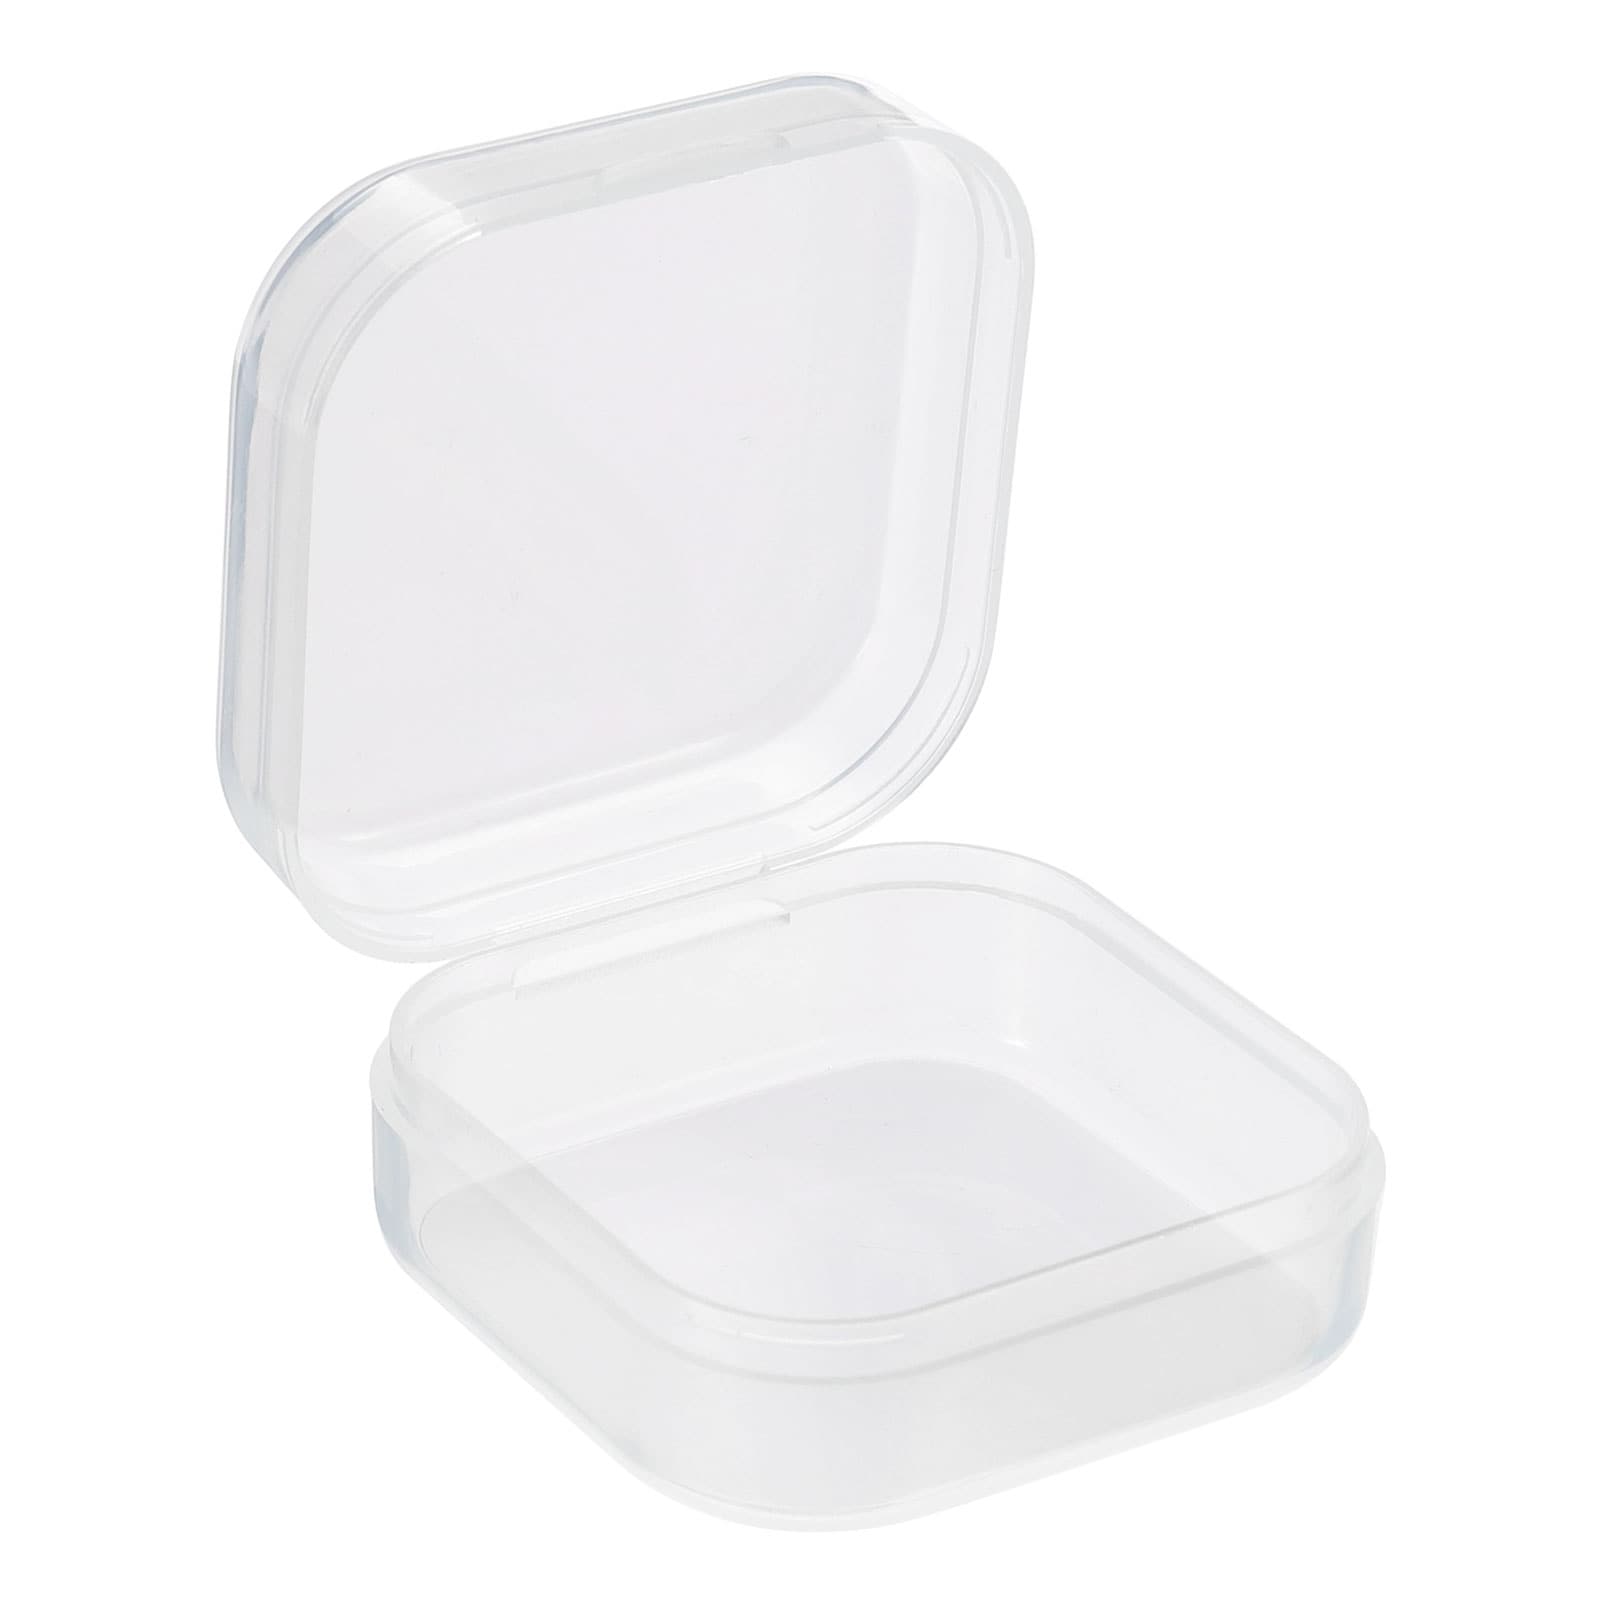 https://ak1.ostkcdn.com/images/products/is/images/direct/1af1b1e149944039464615268ec3bba8906cffc6/24pcs-Clear-Storage-Container-with-Hinged-Lid-38x18mm-Plastic-Square-Craft-Box.jpg